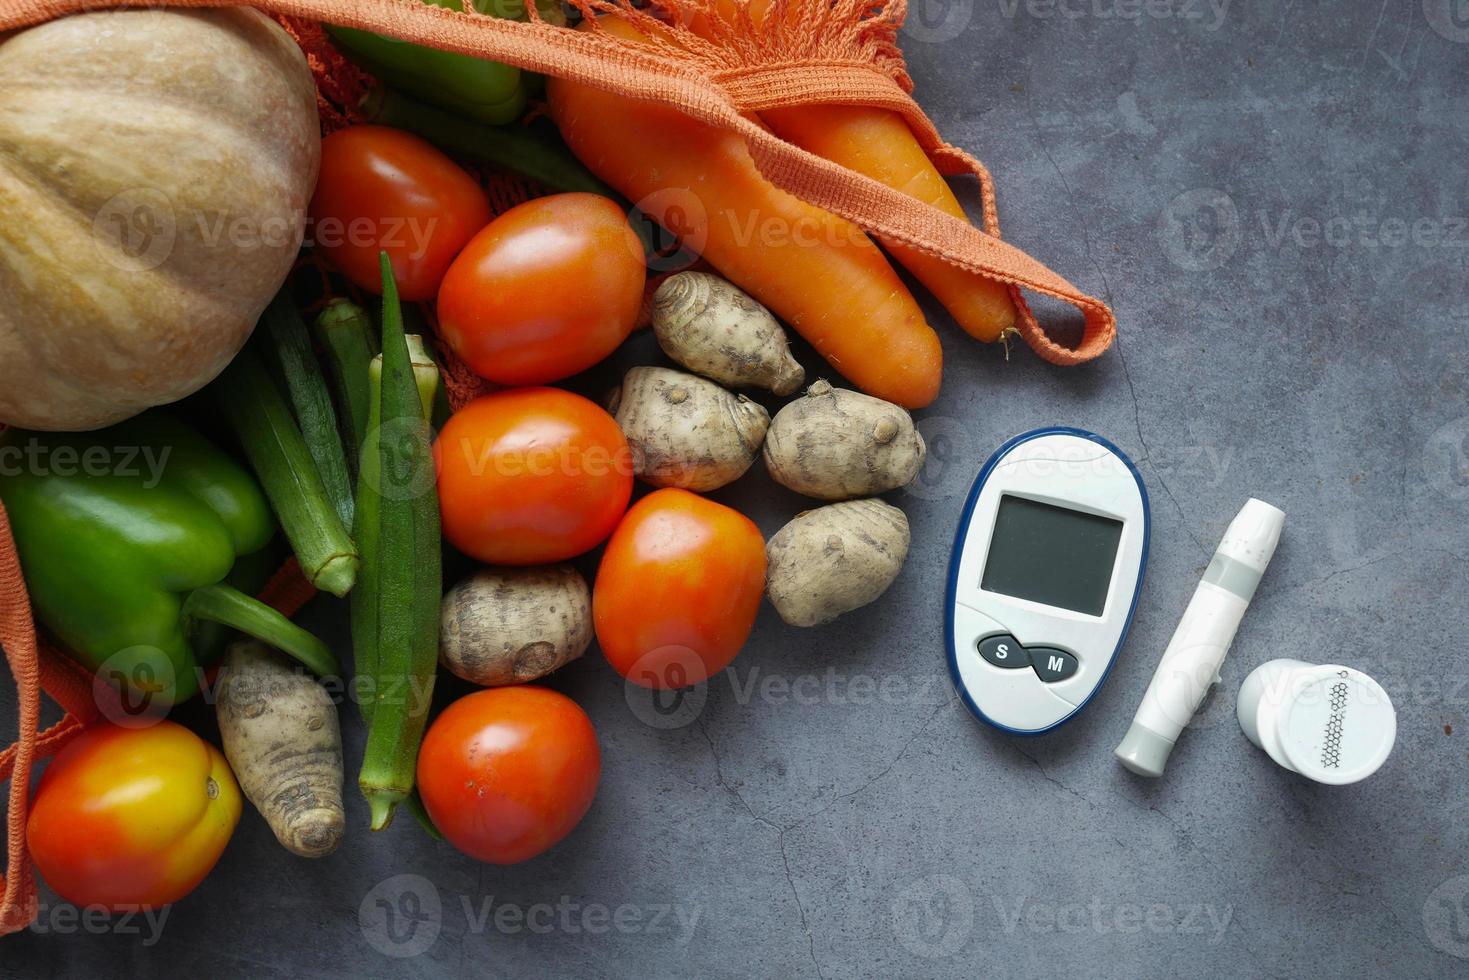 diabetic measurement tools and fresh vegetable on table photo